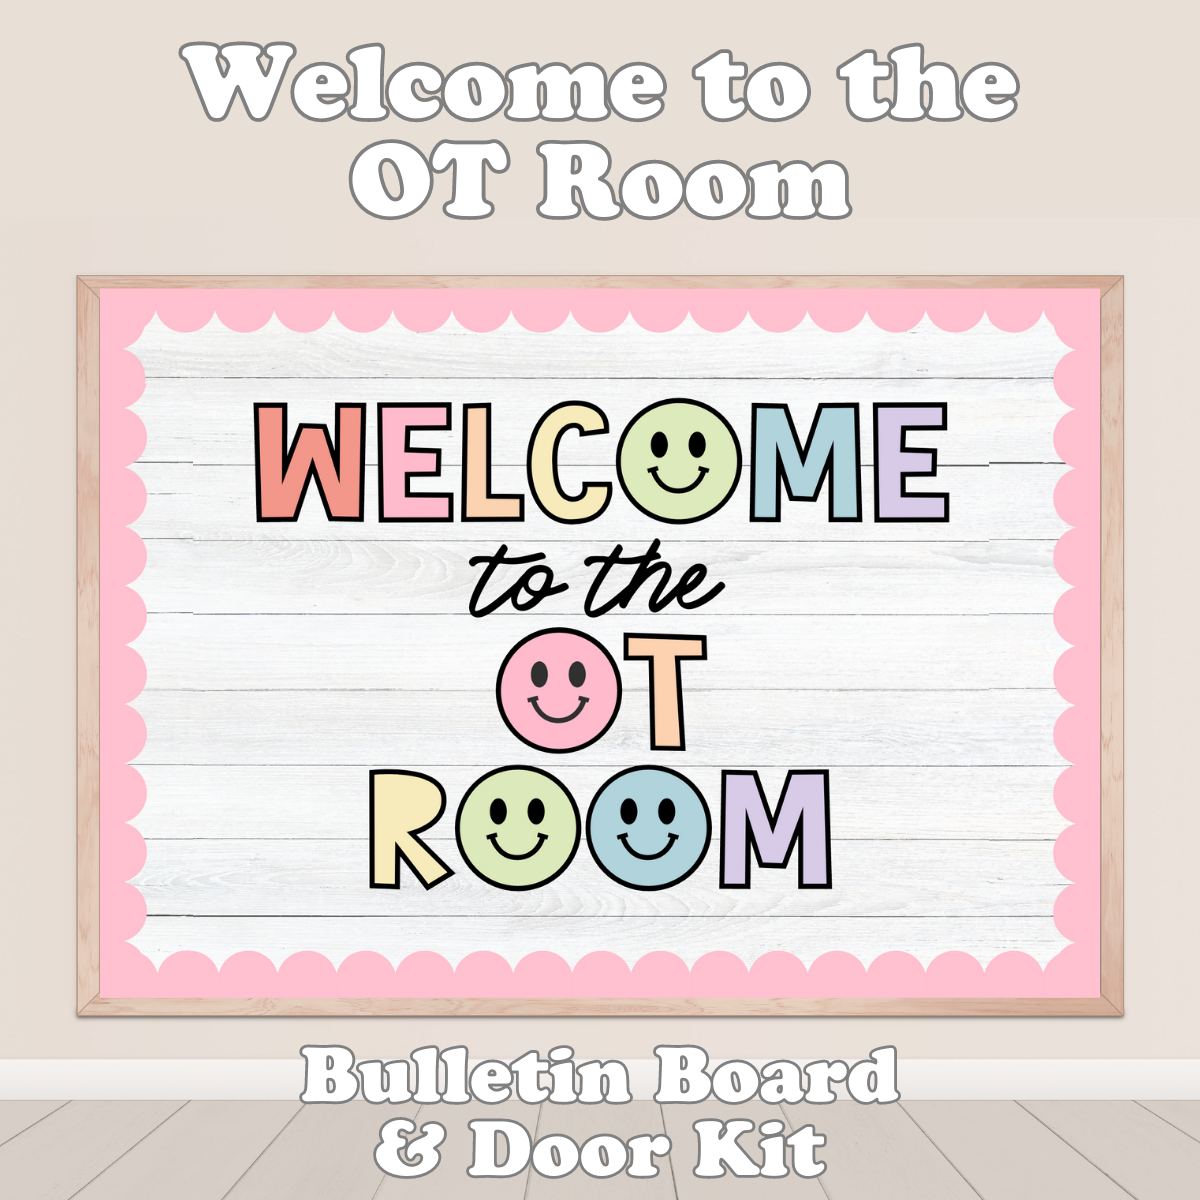 Welcome to the OT Room Kit